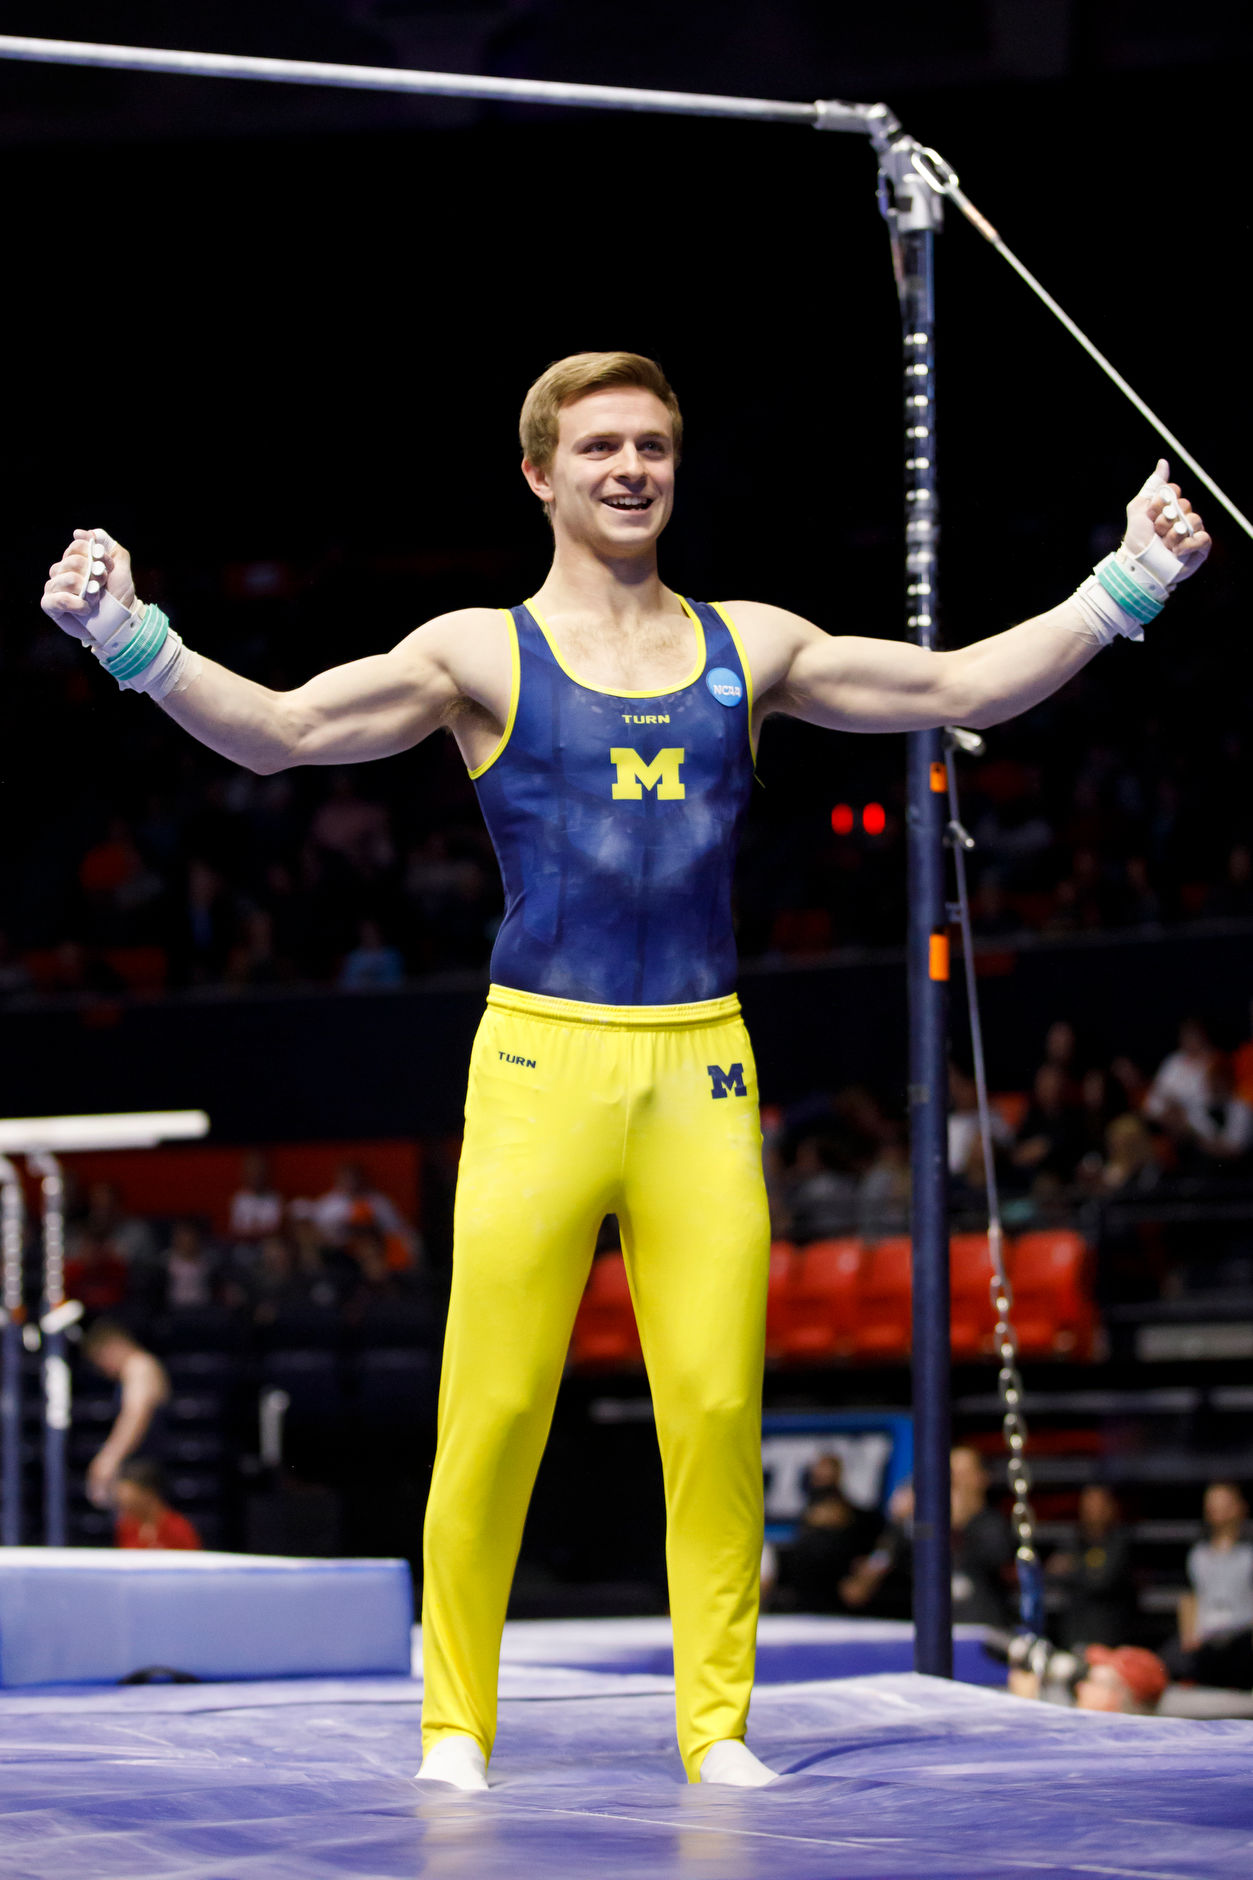 Michigan's Alec Krystek reacts after competing on the horizontal bar at the NCAA Men's Gymnastics Championships on Saturday, April 20, 2019, at the State Farm Center in Champaign, Illinois. (Photo by James Brosher)